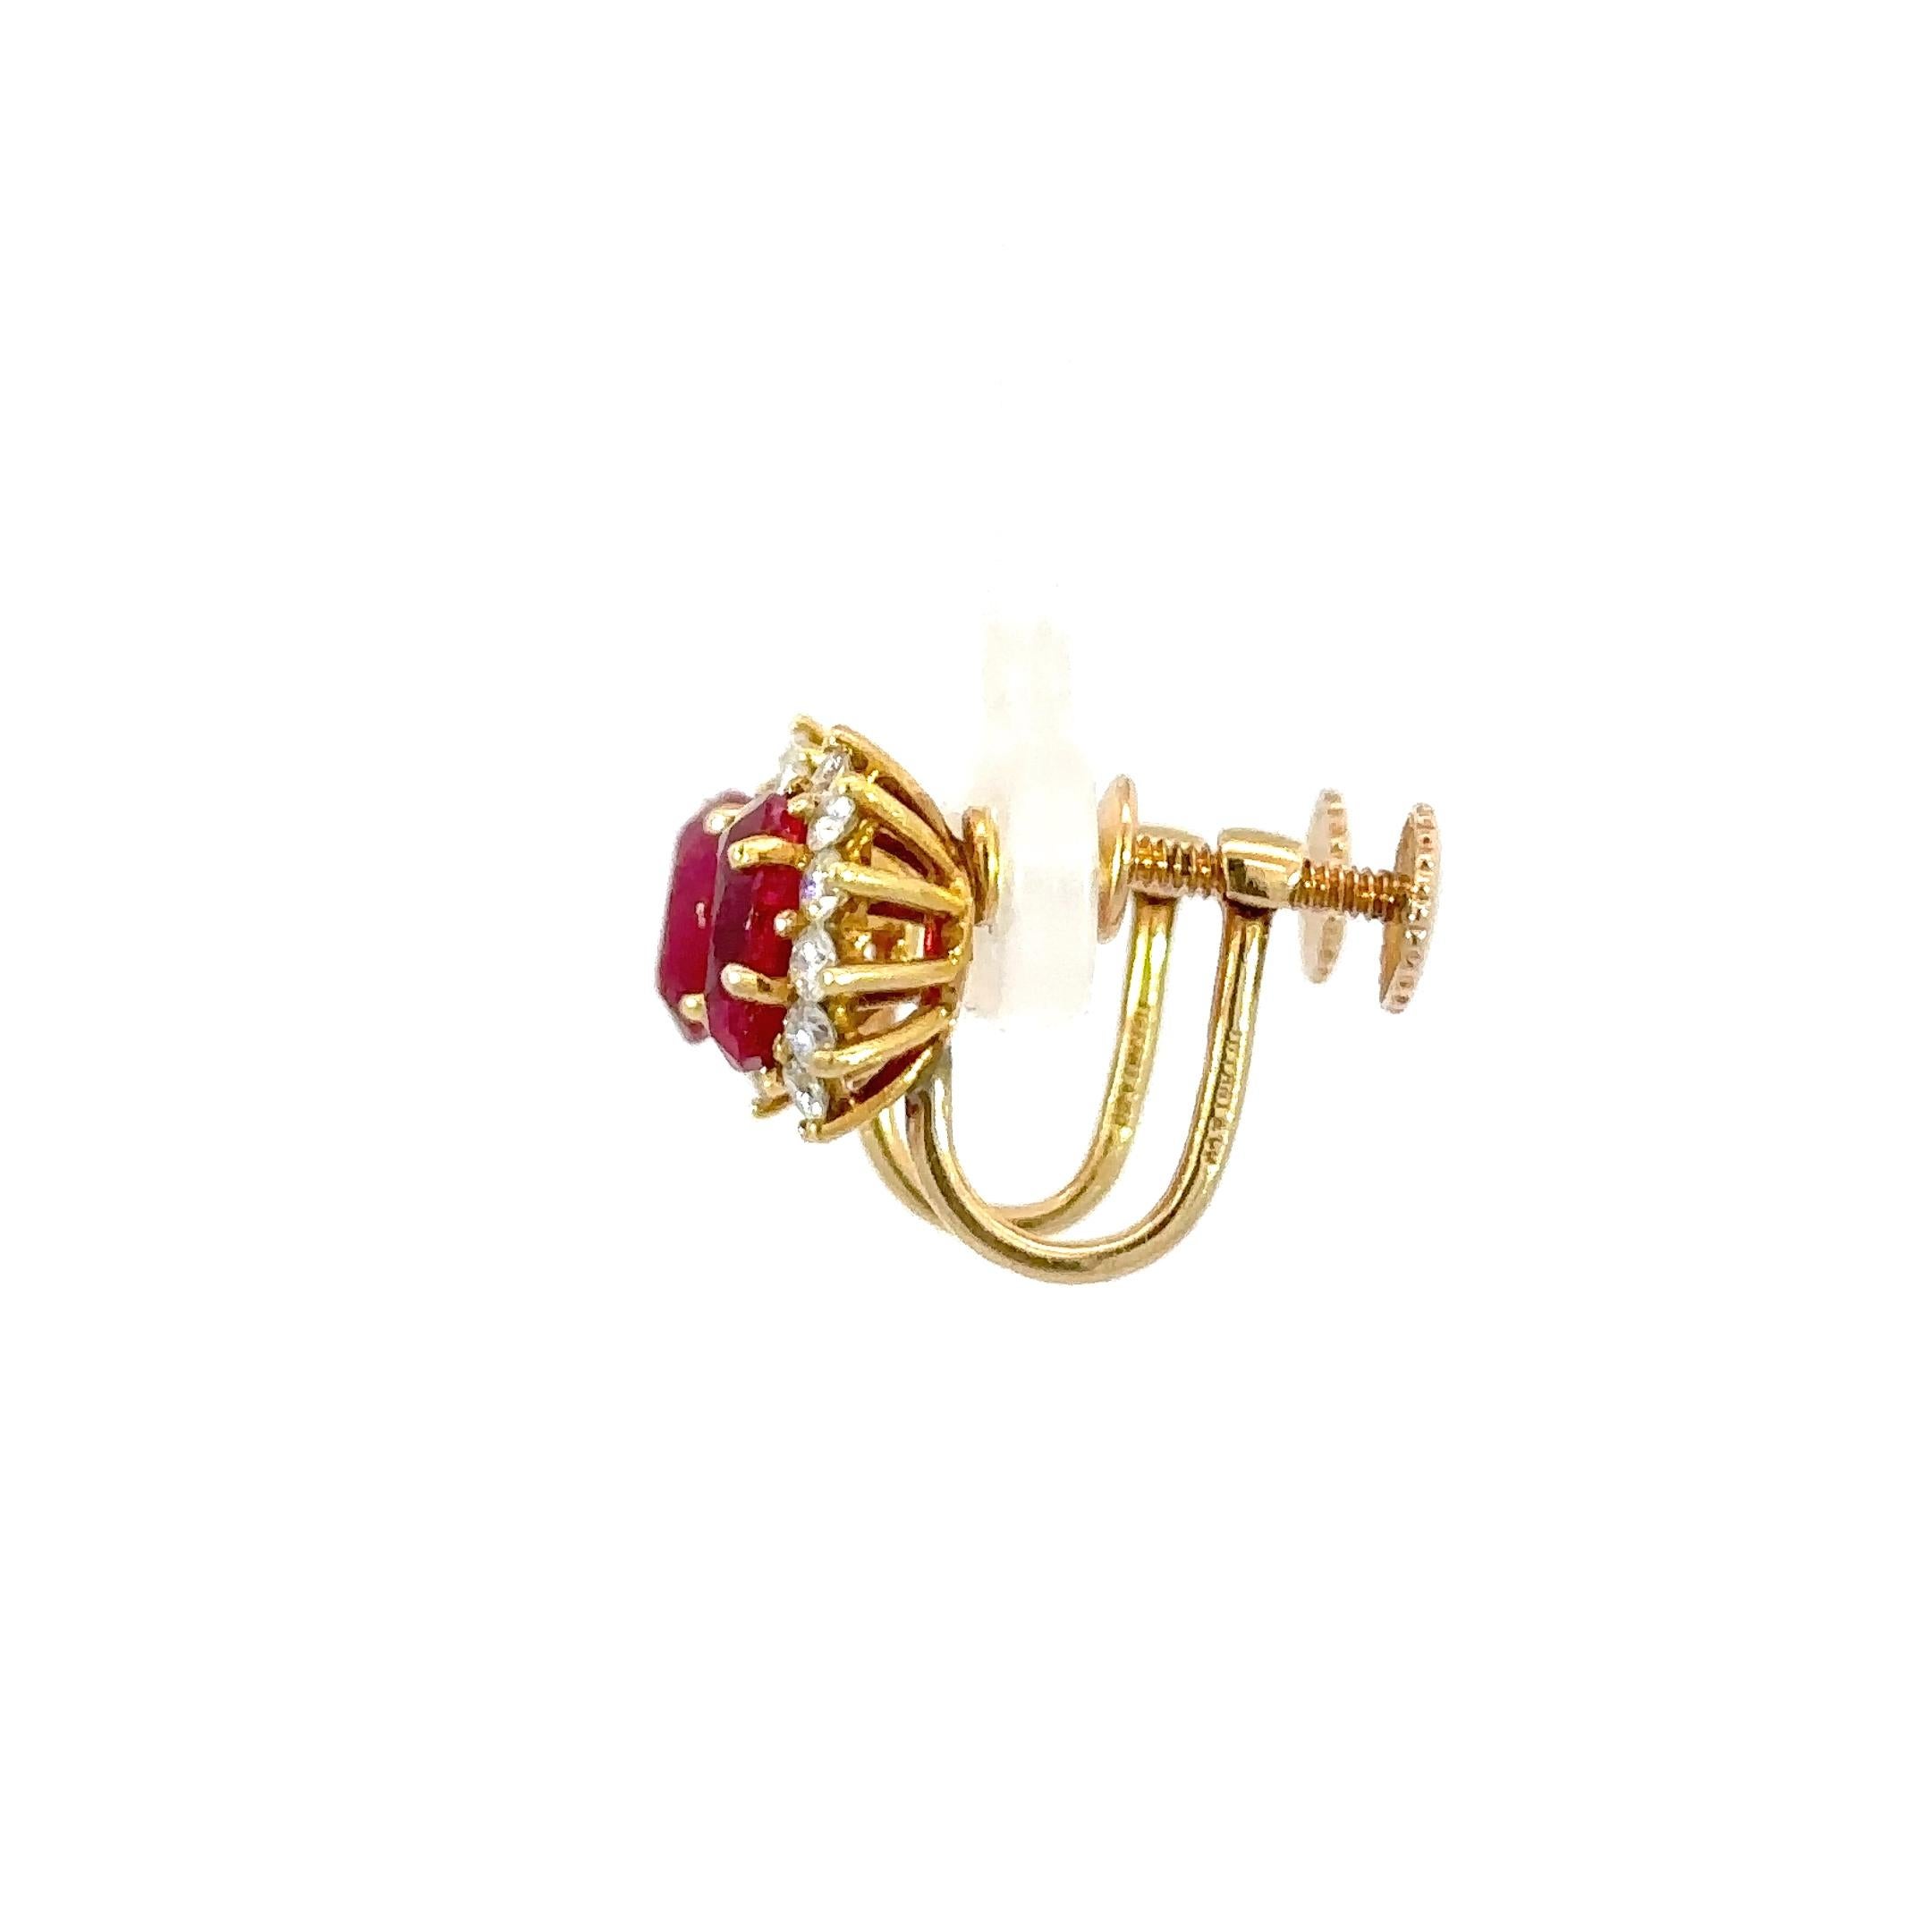 AGL Certification is available.

Introducing our AGL Certified 2.94 total Carat weight Ruby and Diamond 18K Yellow Gold Earrings—a harmonious fusion of luxury encircled by a halo of brilliant-cut diamonds set in the warm embrace of 18K yellow gold.